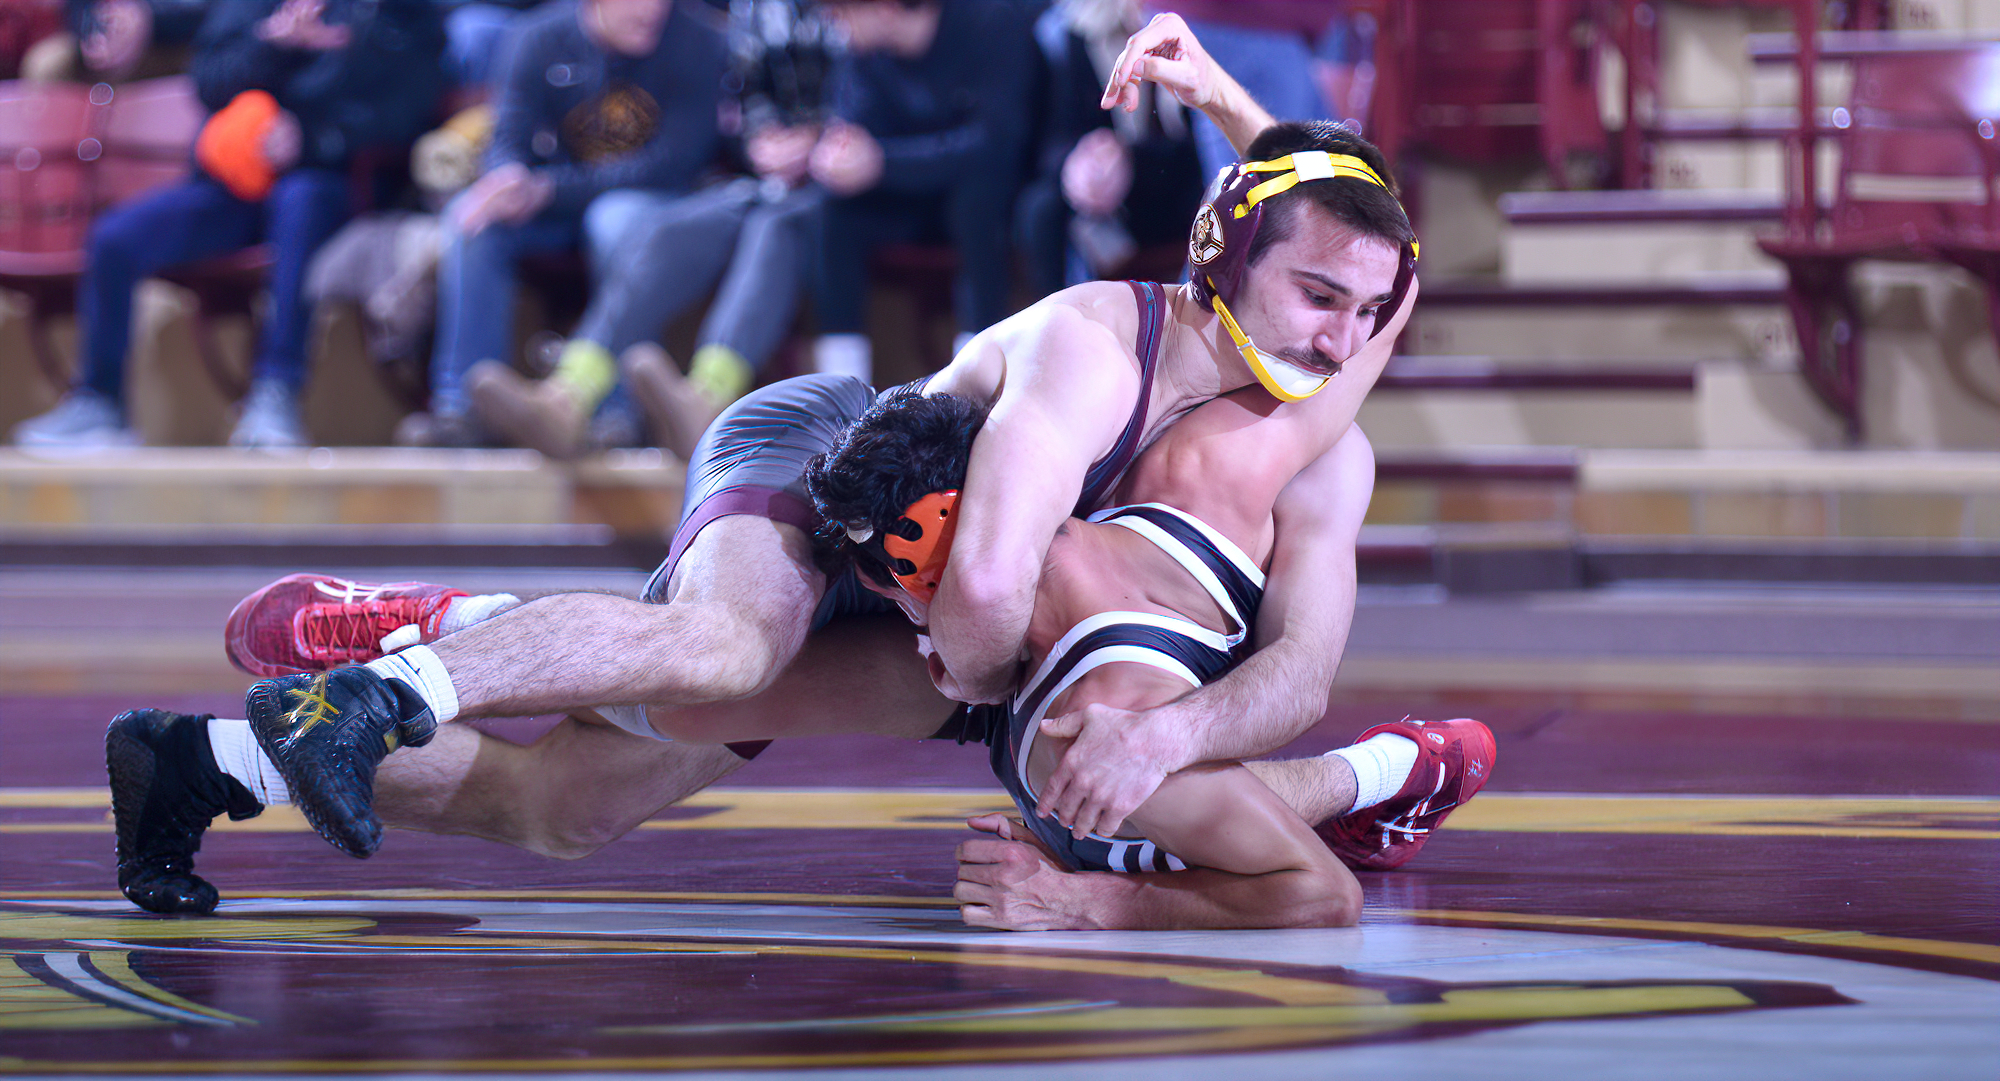 Senior Jake Nohre gets his opponent's shoulder turned on his way to a first-period pin during the Cobbers' 28-16 win over Jamestown.